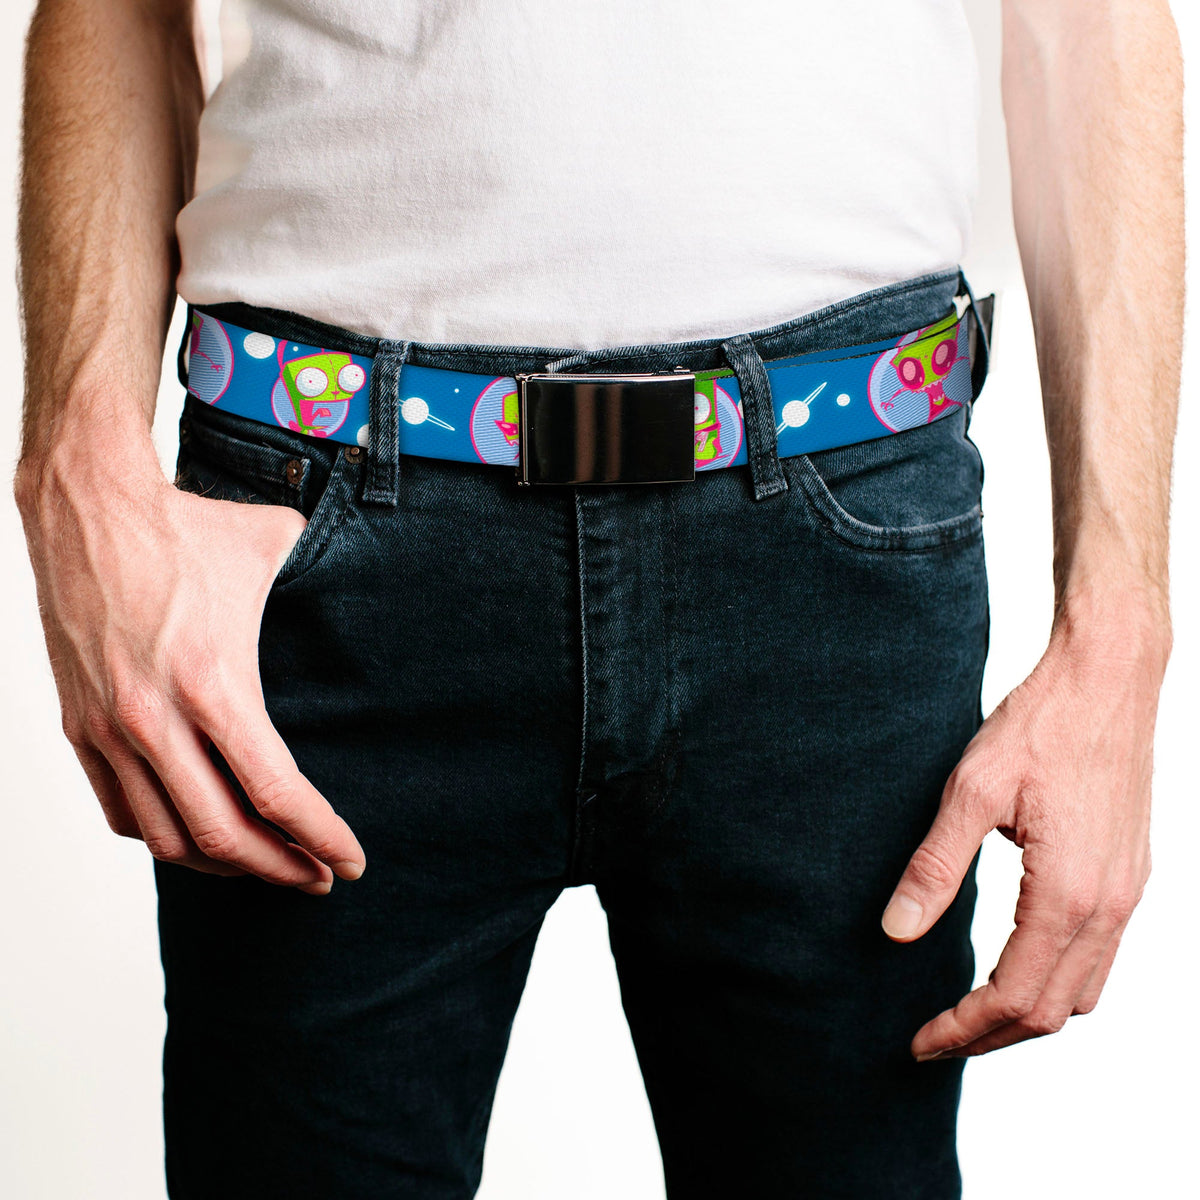 Black Buckle Web Belt - Invader Zim and GIR Poses and Planets Blue/White Webbing